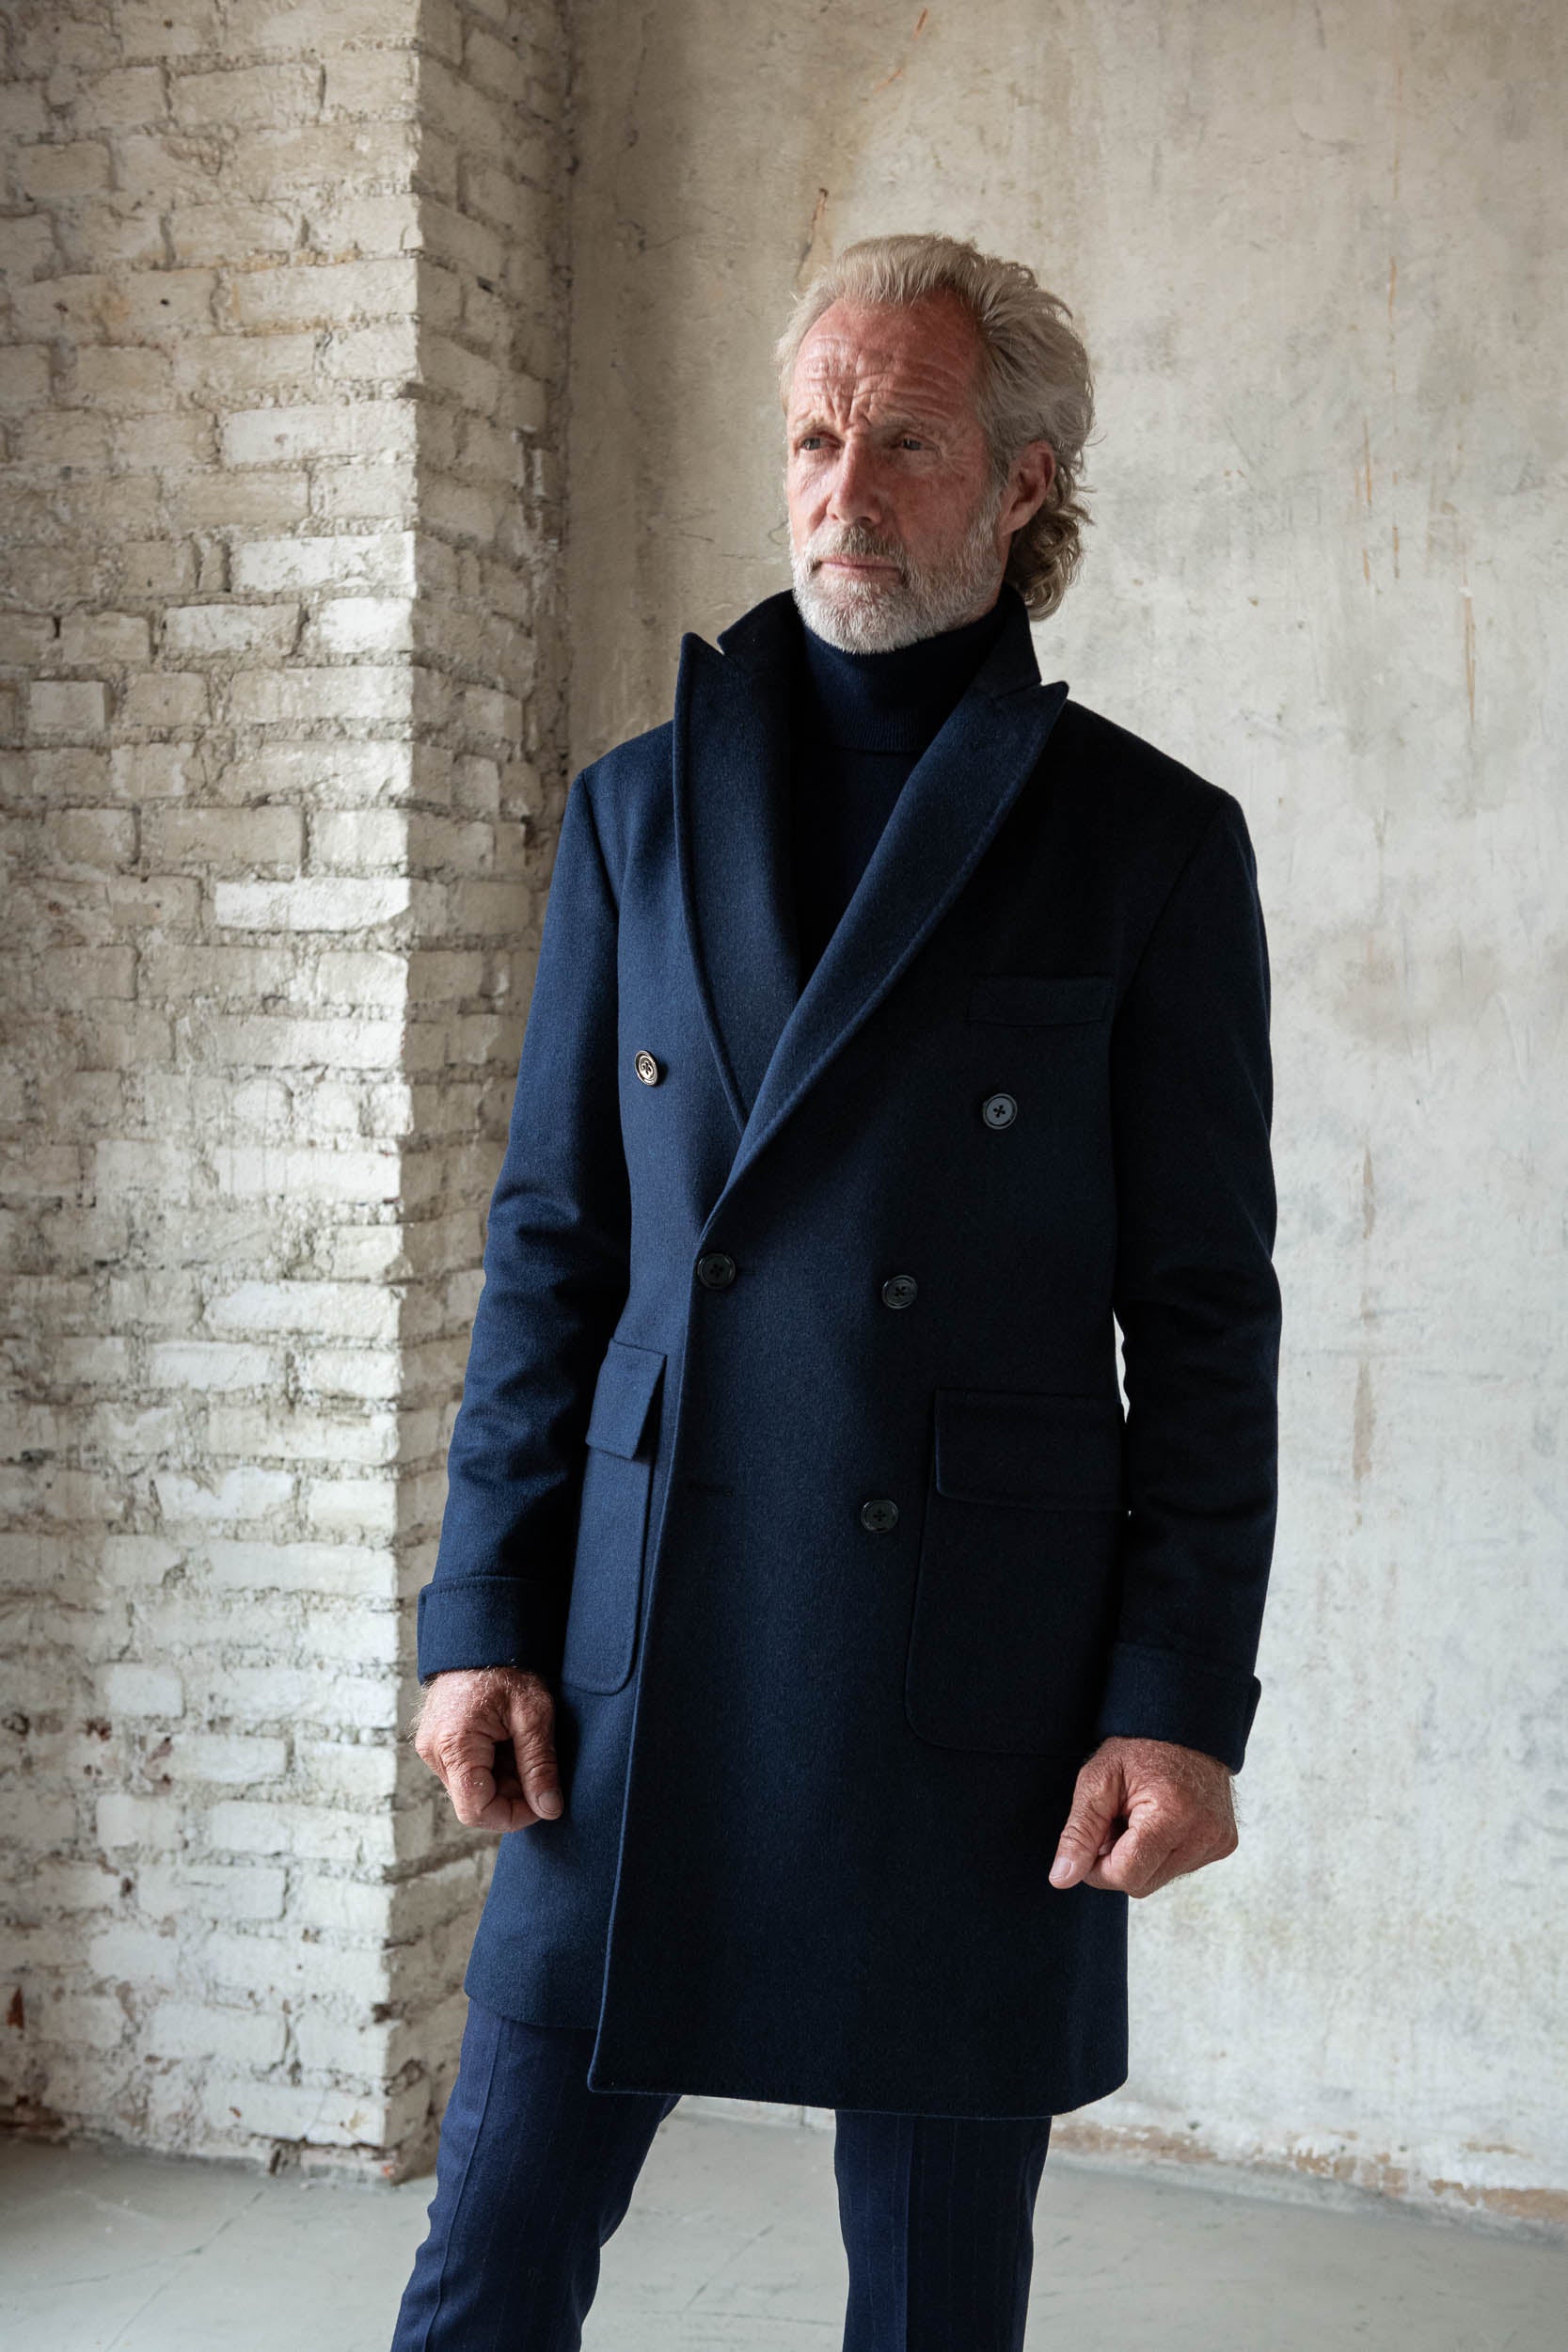 blue coat, blue overcoat, blue double breasted wool coat, blue wool coat for men, blue double breasted coat Loro Piana wool, blue wool Loro Piana double breasted overcoat, classic men's double breasted overcoat, pardessus croisé bleu, pardessus croisé bleu laine Loro Piana, pardessus croisé bleu homme, manteau croisé classique homme, manteau classique bleu, manteau formel homme, manteau formel croisé bleu, formal men coat, formal double breasted overcoat, formal double breasted blue coat